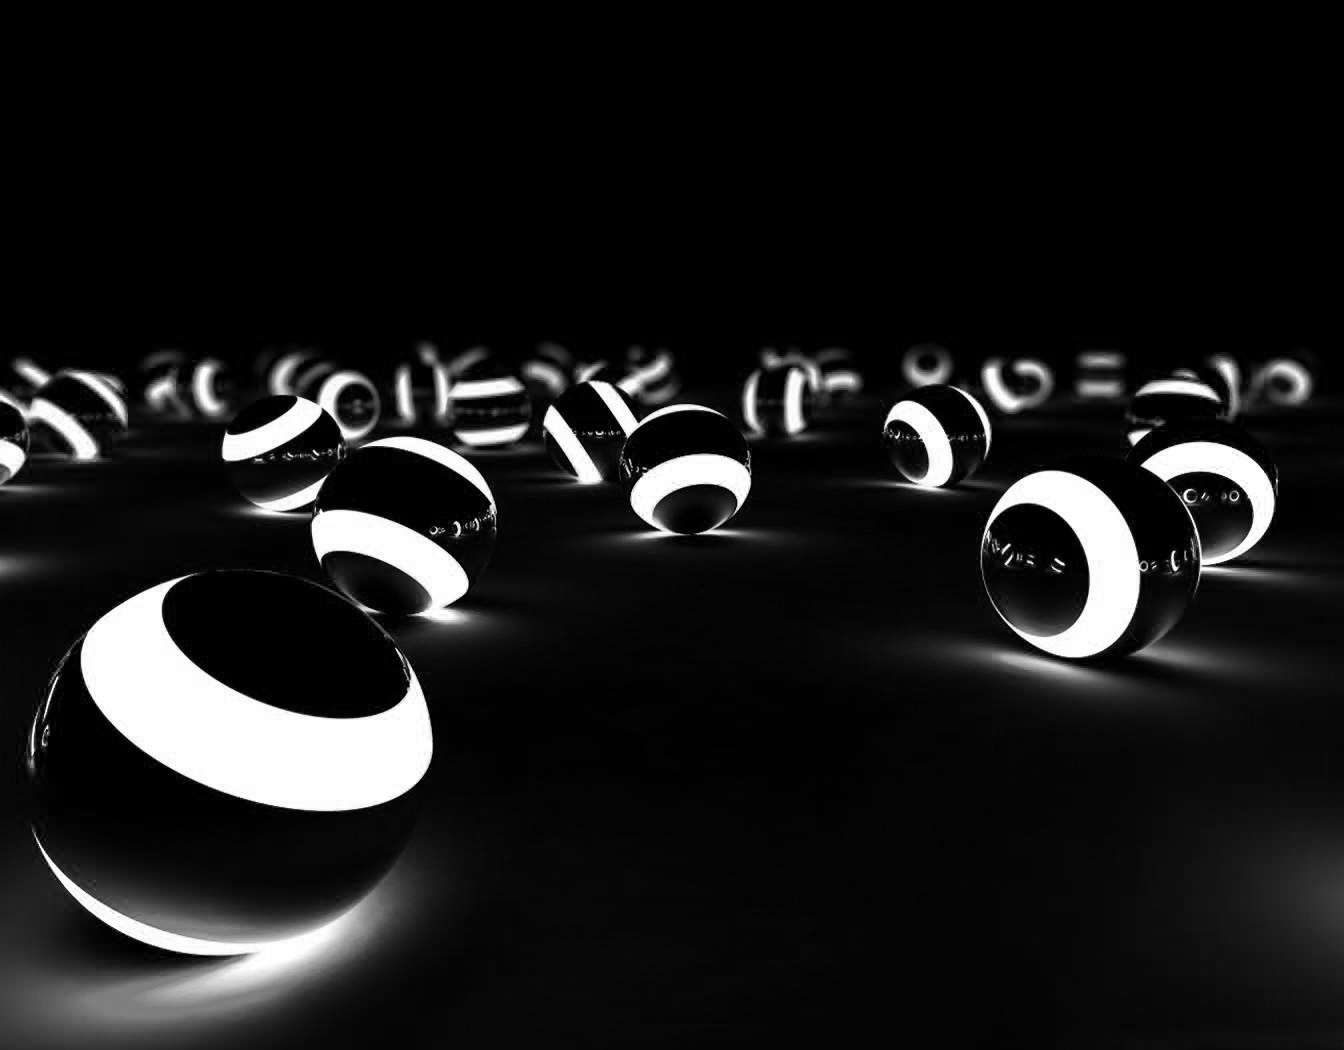 Black And White 3d Wallpaper Hd Image Num 14